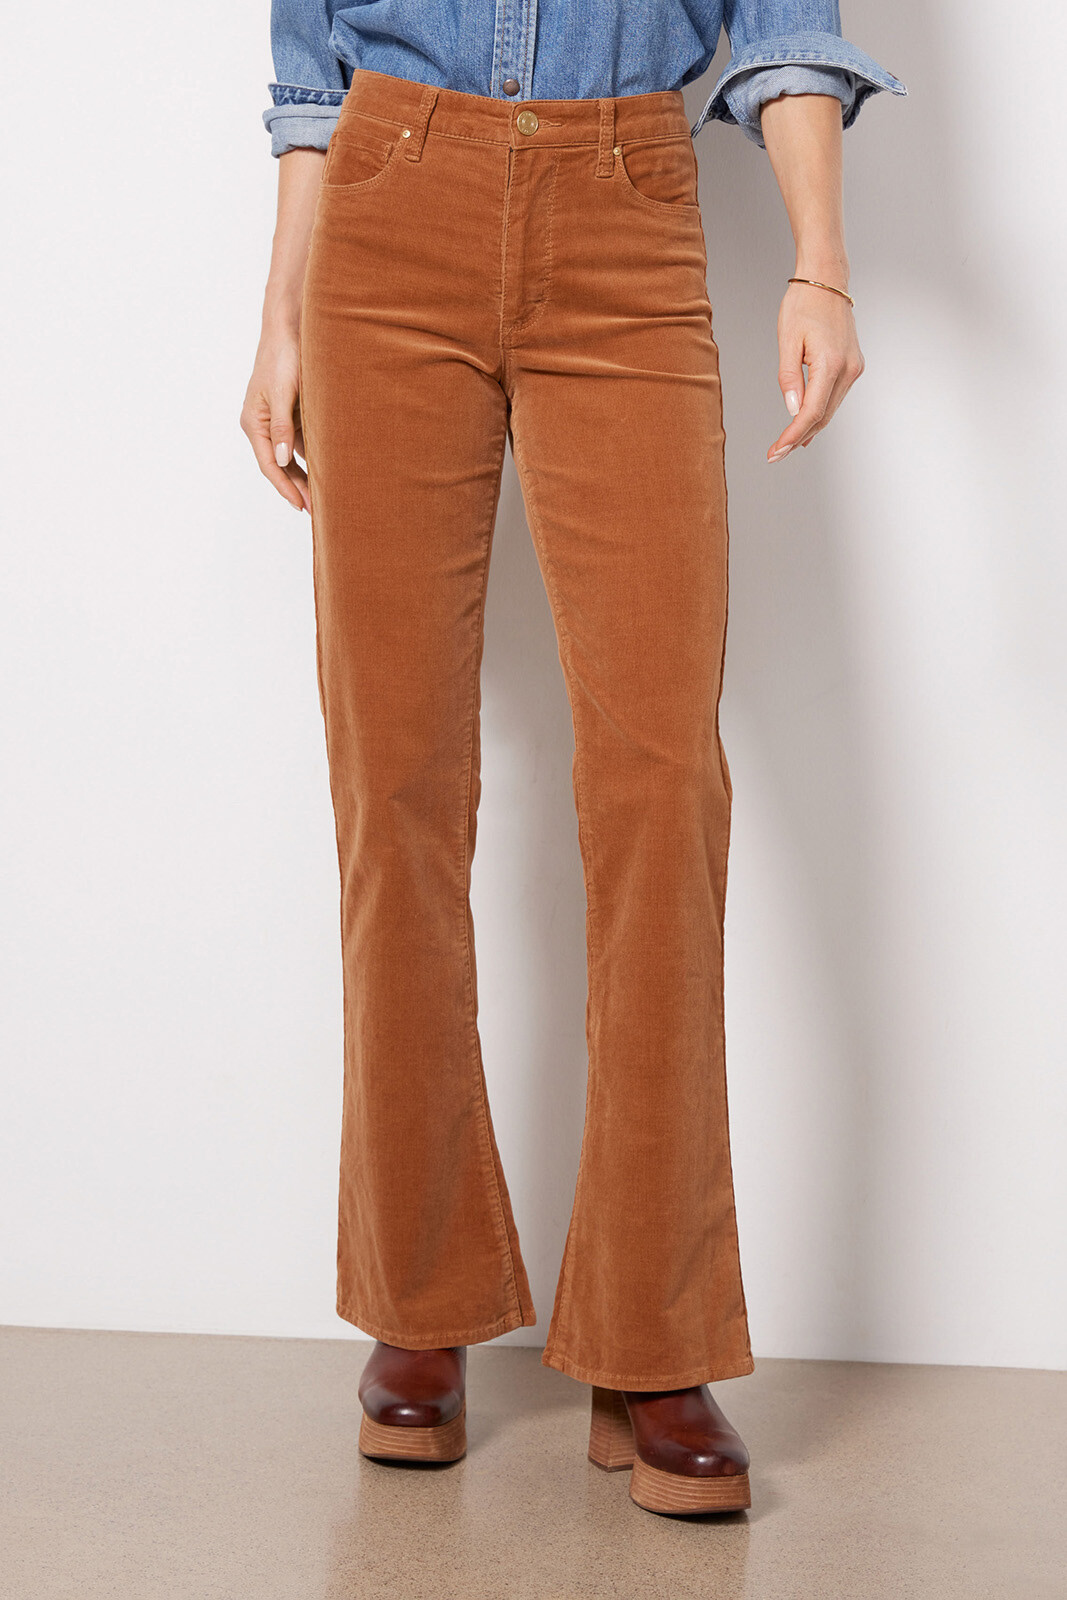 KUT from the Kloth Ana Corduroy High-Rise Fab Ab Flare